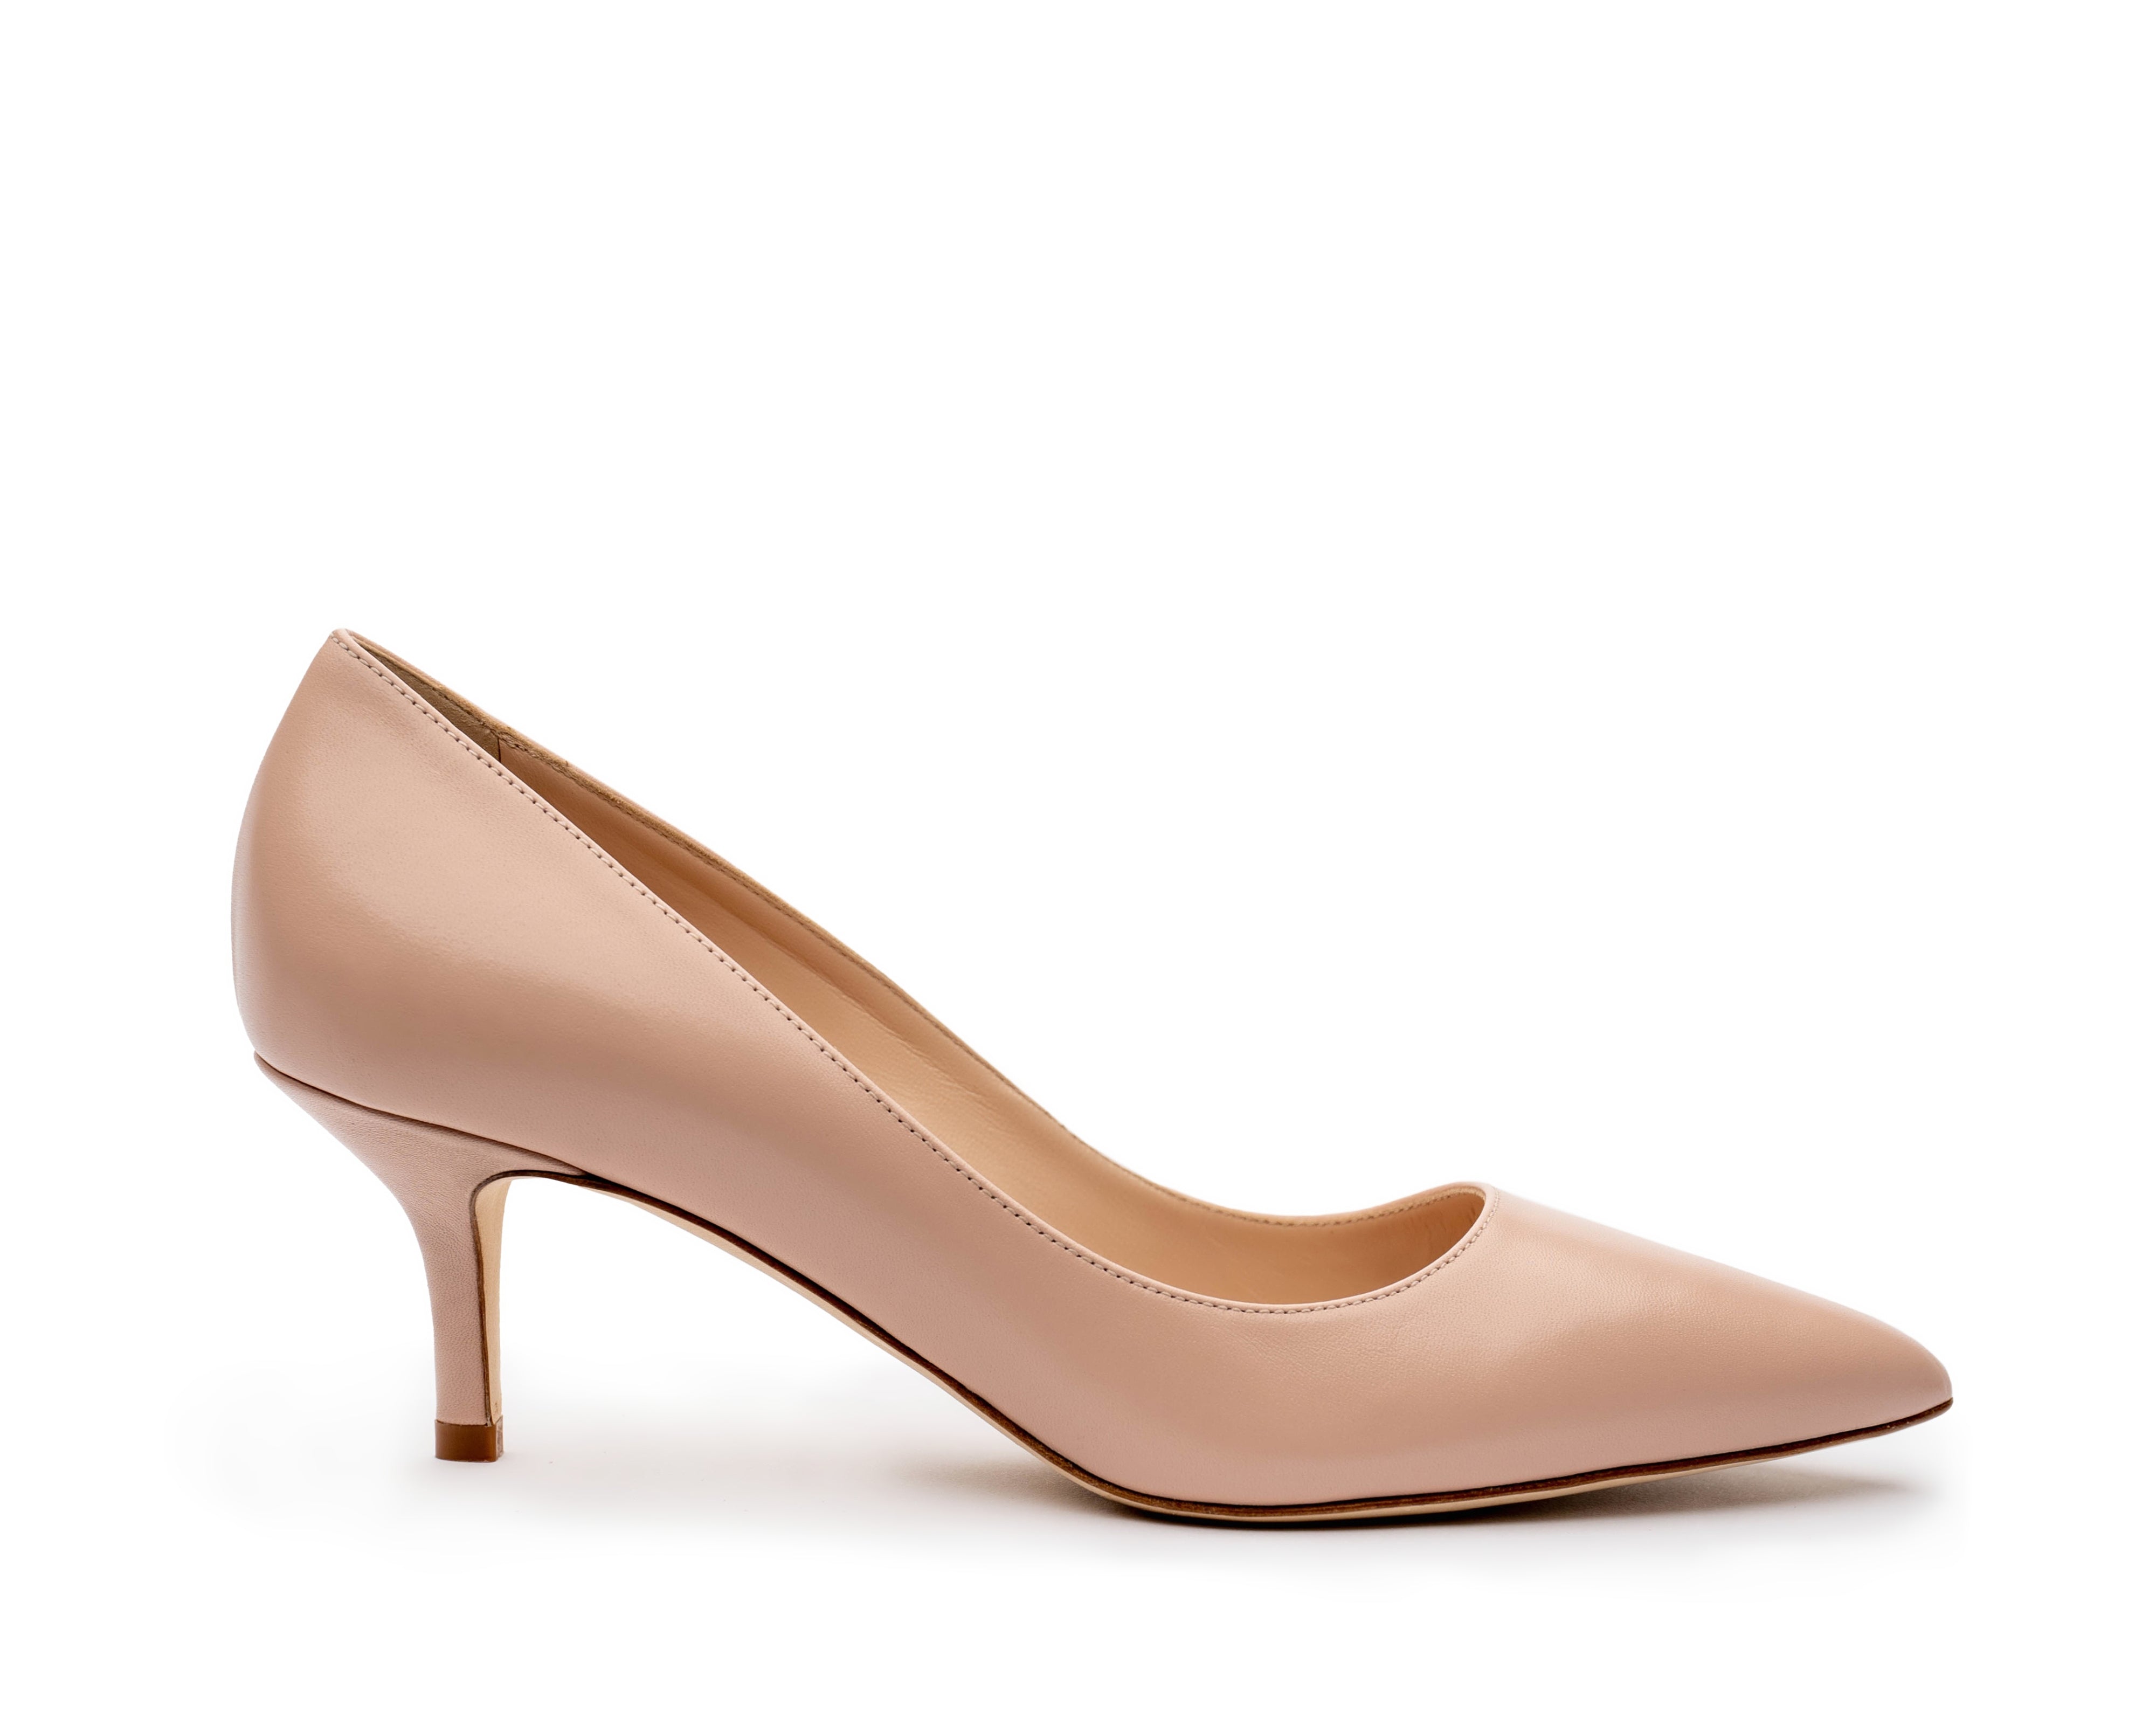 Soft Pink Pumps. Women's Pink low Heels. Nude Pumps. Nude Skin tone women's shoes. Business Shoes. Office Professional Low Heels.